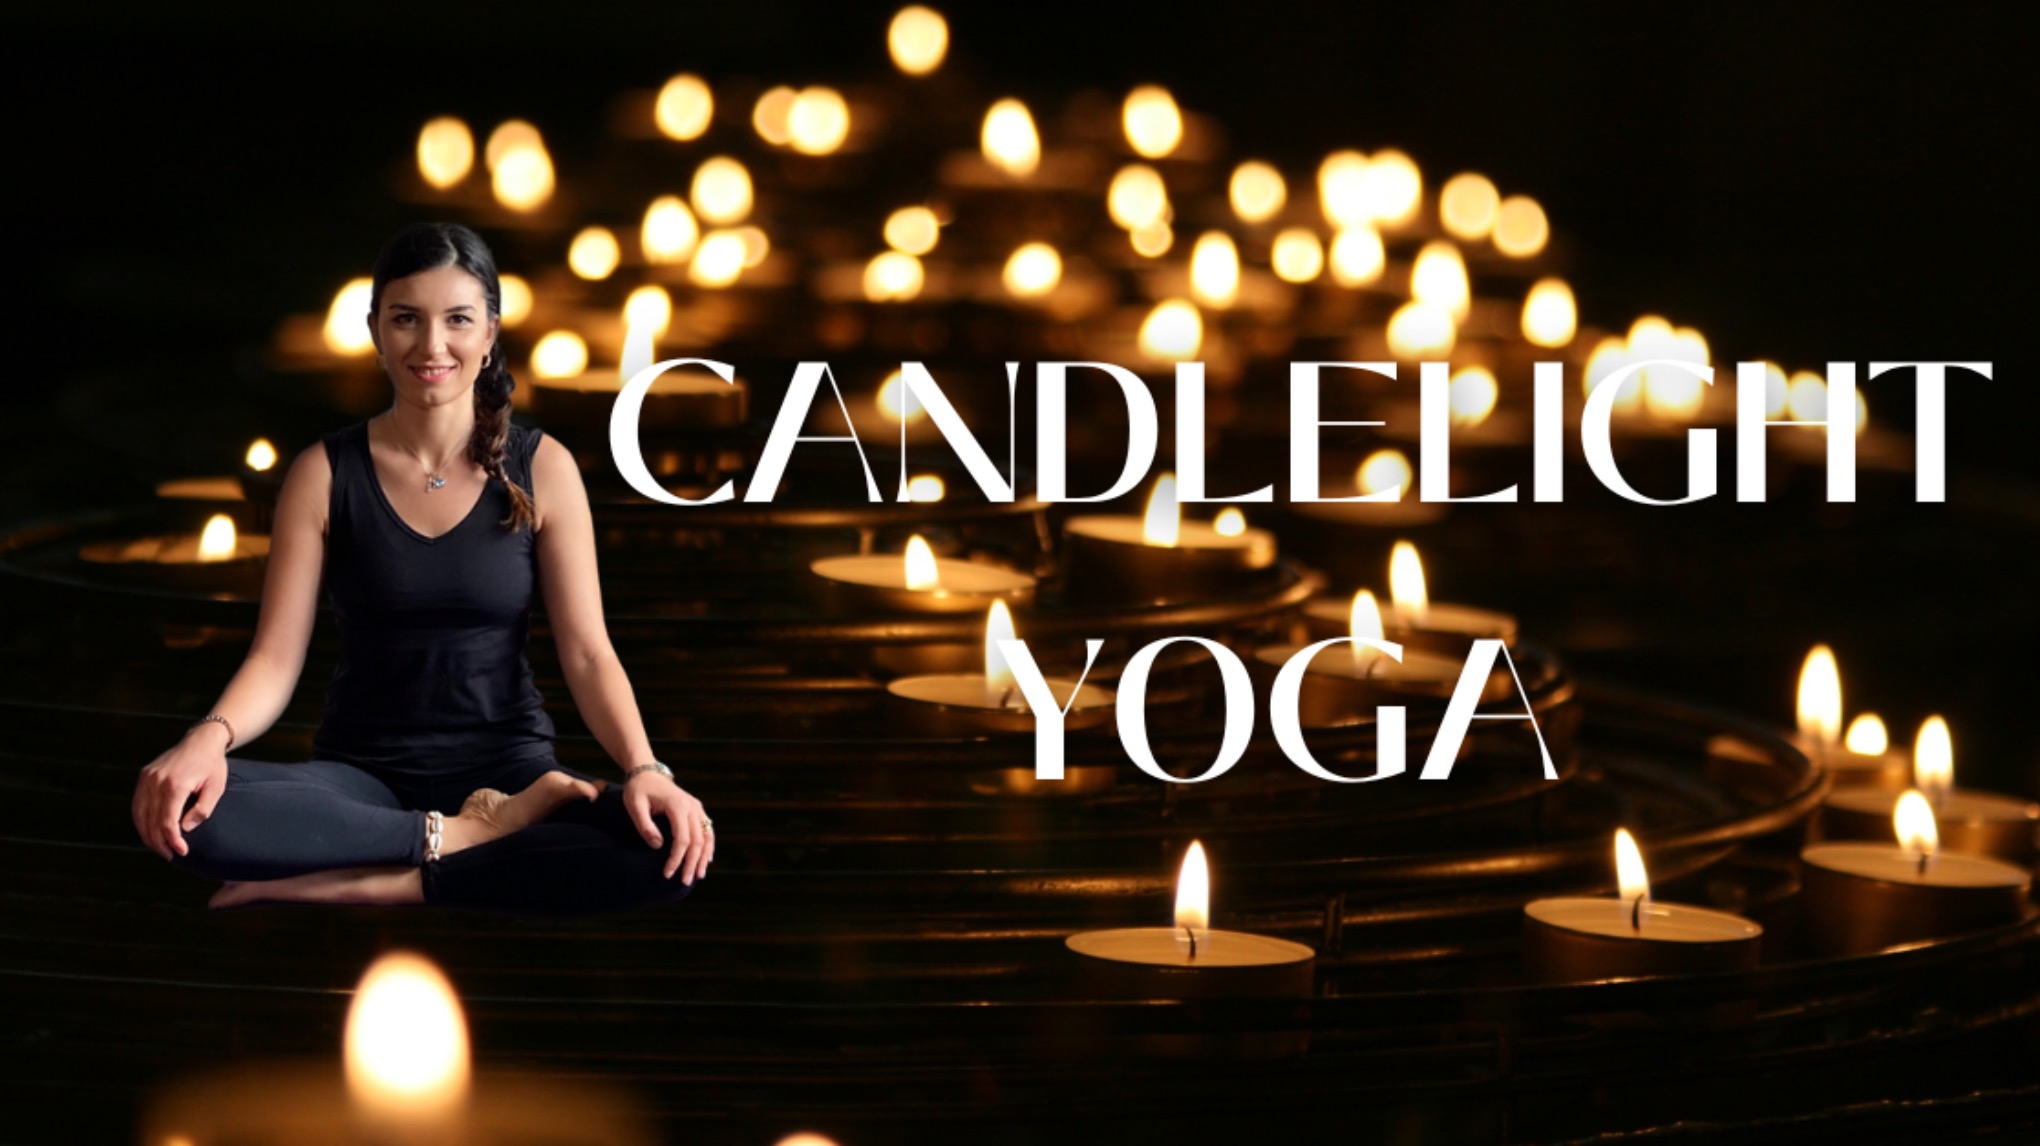 Candlelight Yoga with Aromatherapy - Sound Bath and Detox Dinner (April)